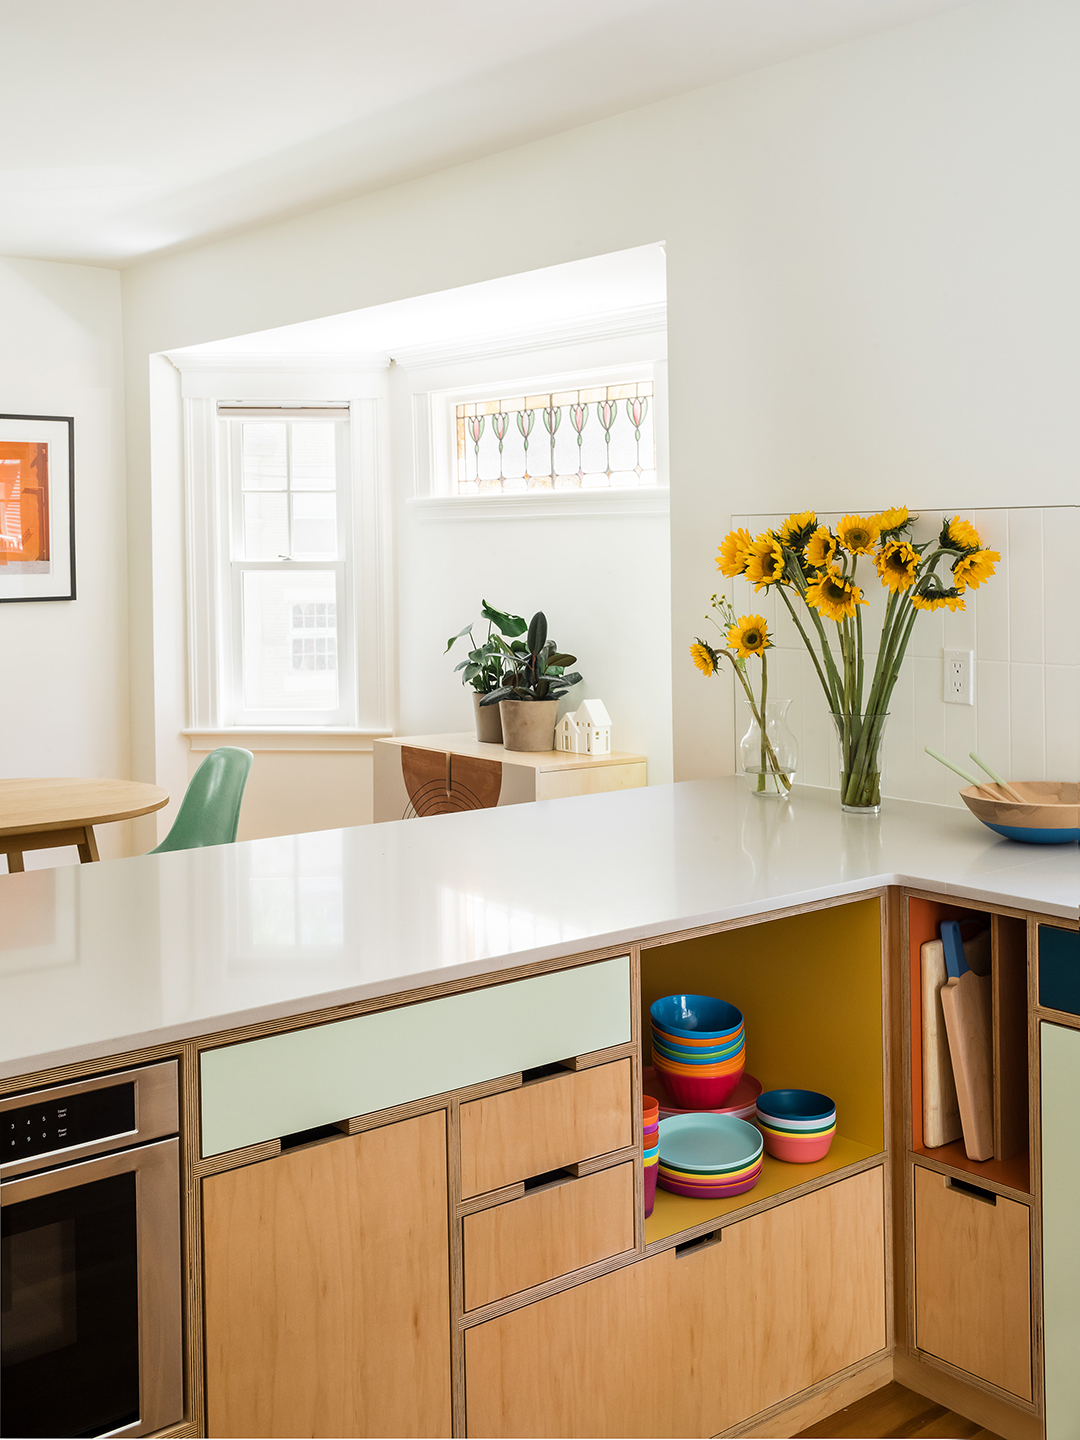 An Unexpected Benefit of Colorblocked Cabinets? Guests Find Things in a ...